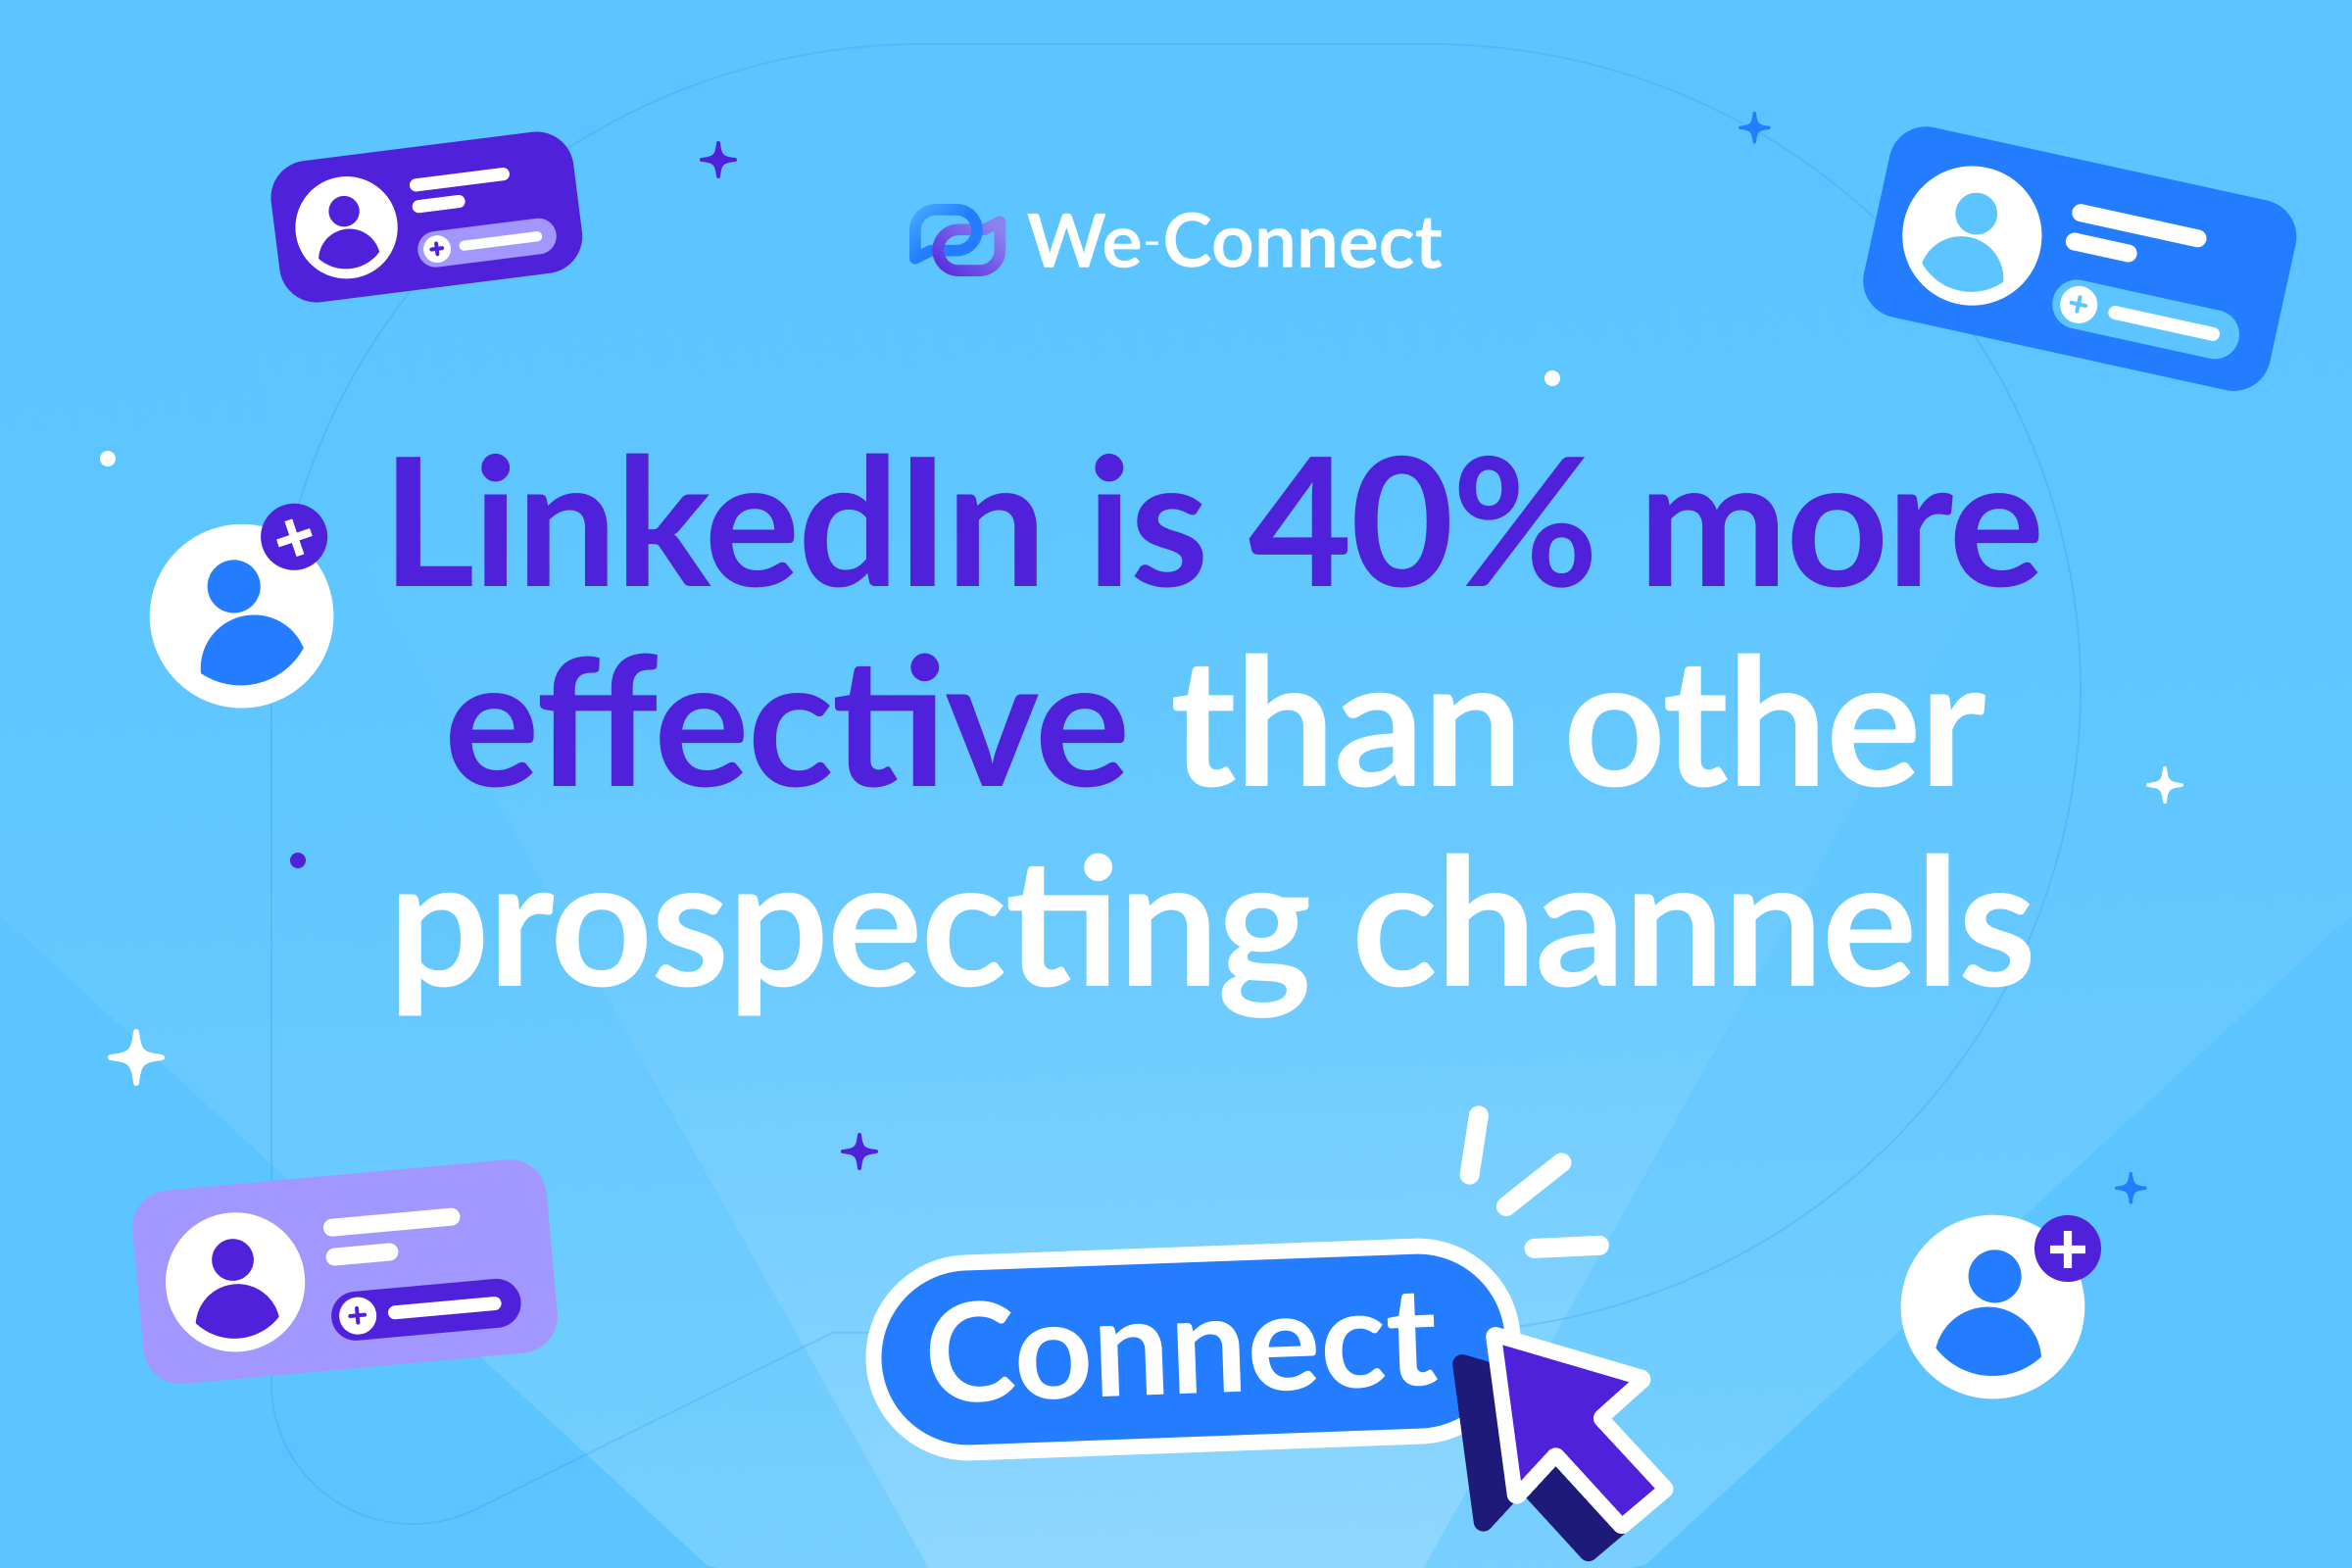 LinkedIn is 40% more effective than other prospecting channels